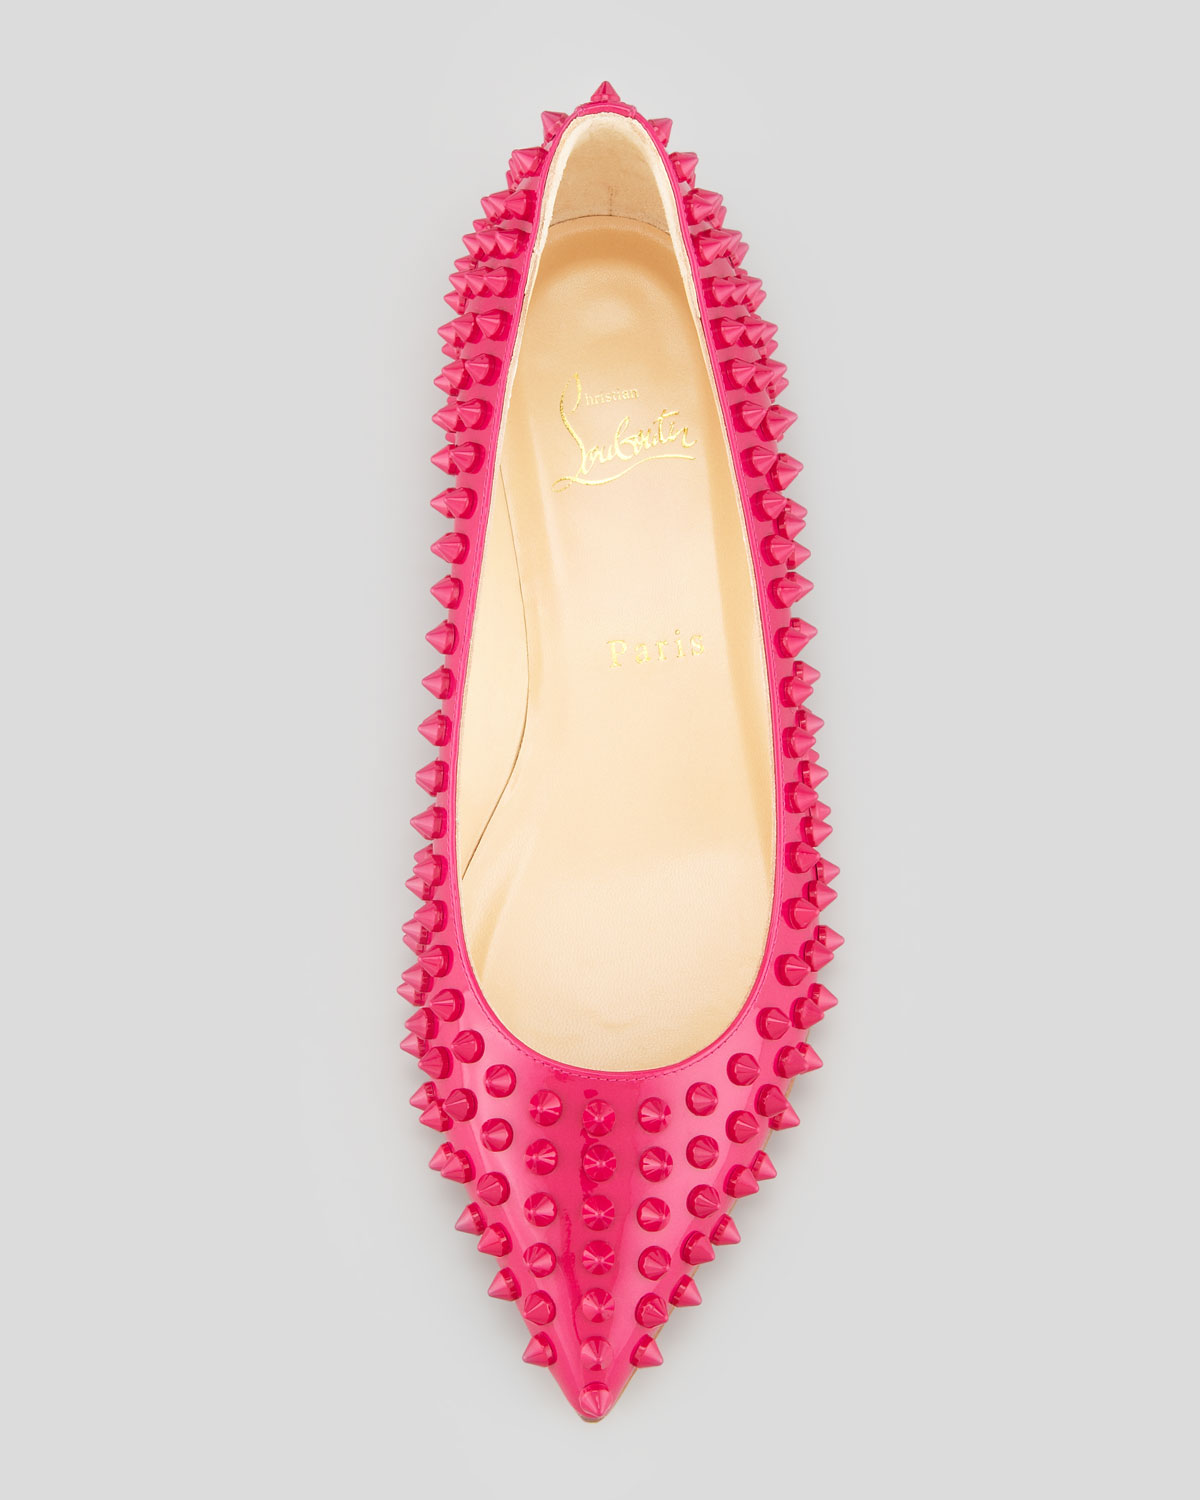 Artesur ? christian louboutin Pigalle Spikes flats Coral red